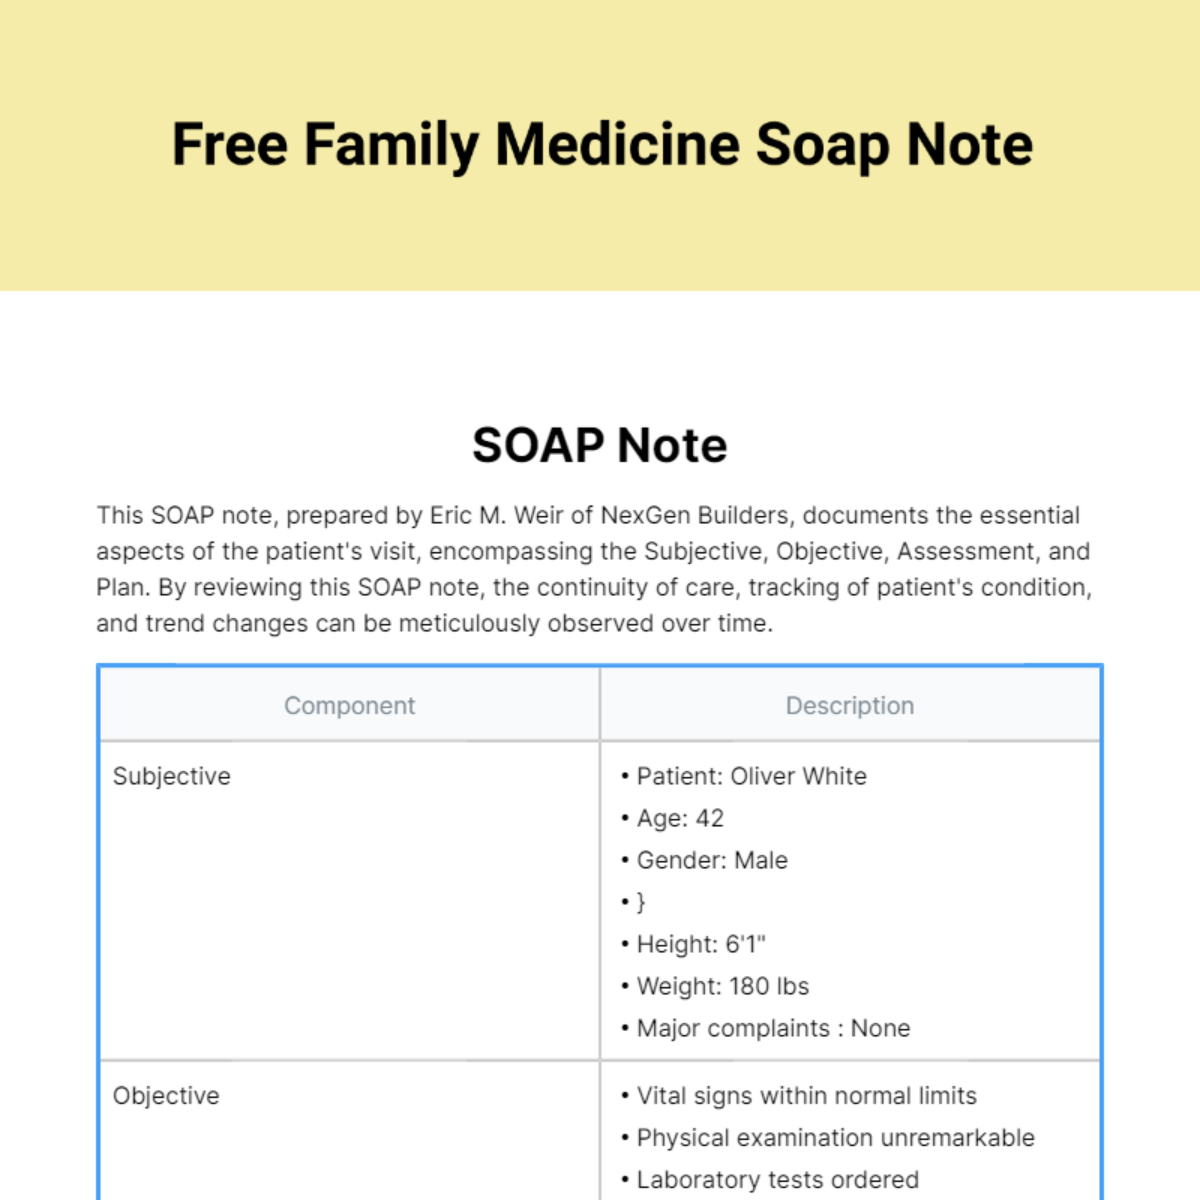 FREE SOAP Note Templates Templates & Examples - Edit Online & Download ...